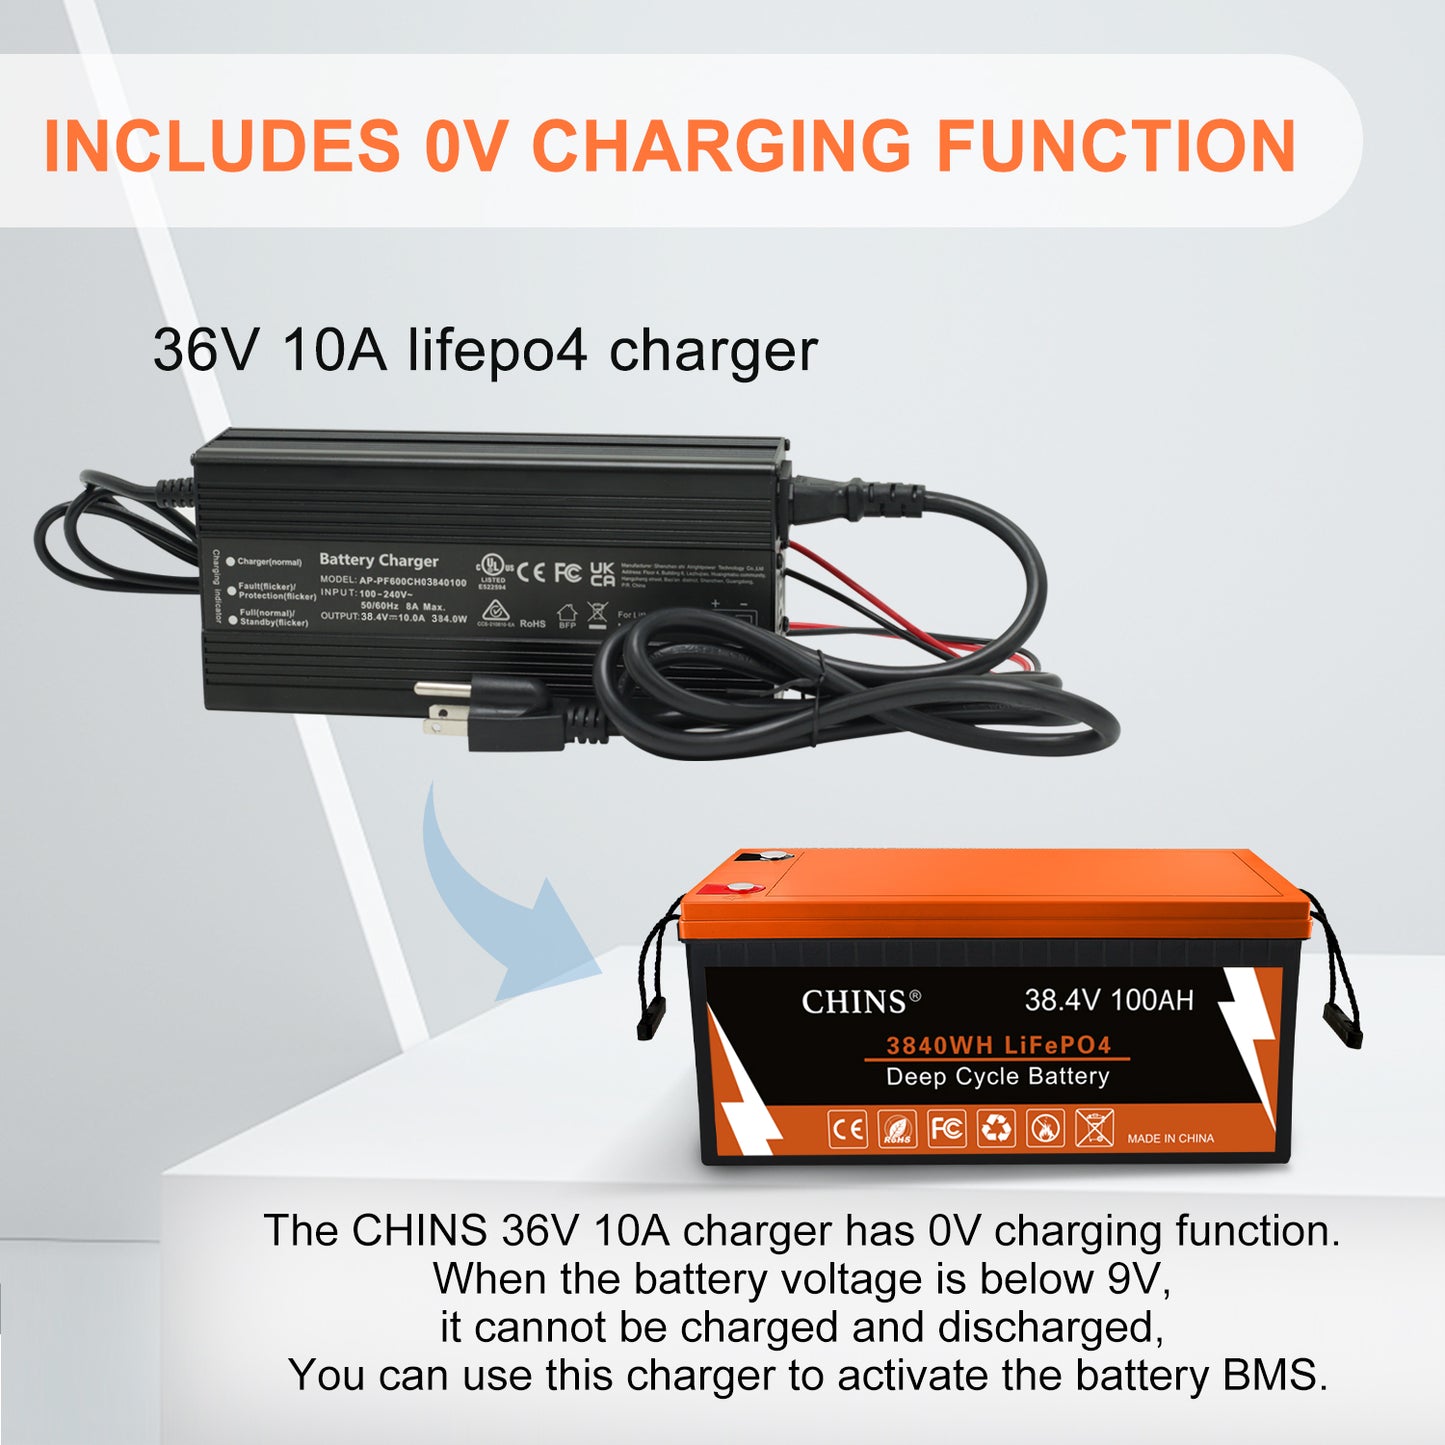 CHINS Bluetooth LiFePO4 Smart 36V 100AH Lithium Battery+ 36V 10A Lithium Battery Charger for Golf Cart, Trolling Motor, Marine, Peak Current 500A